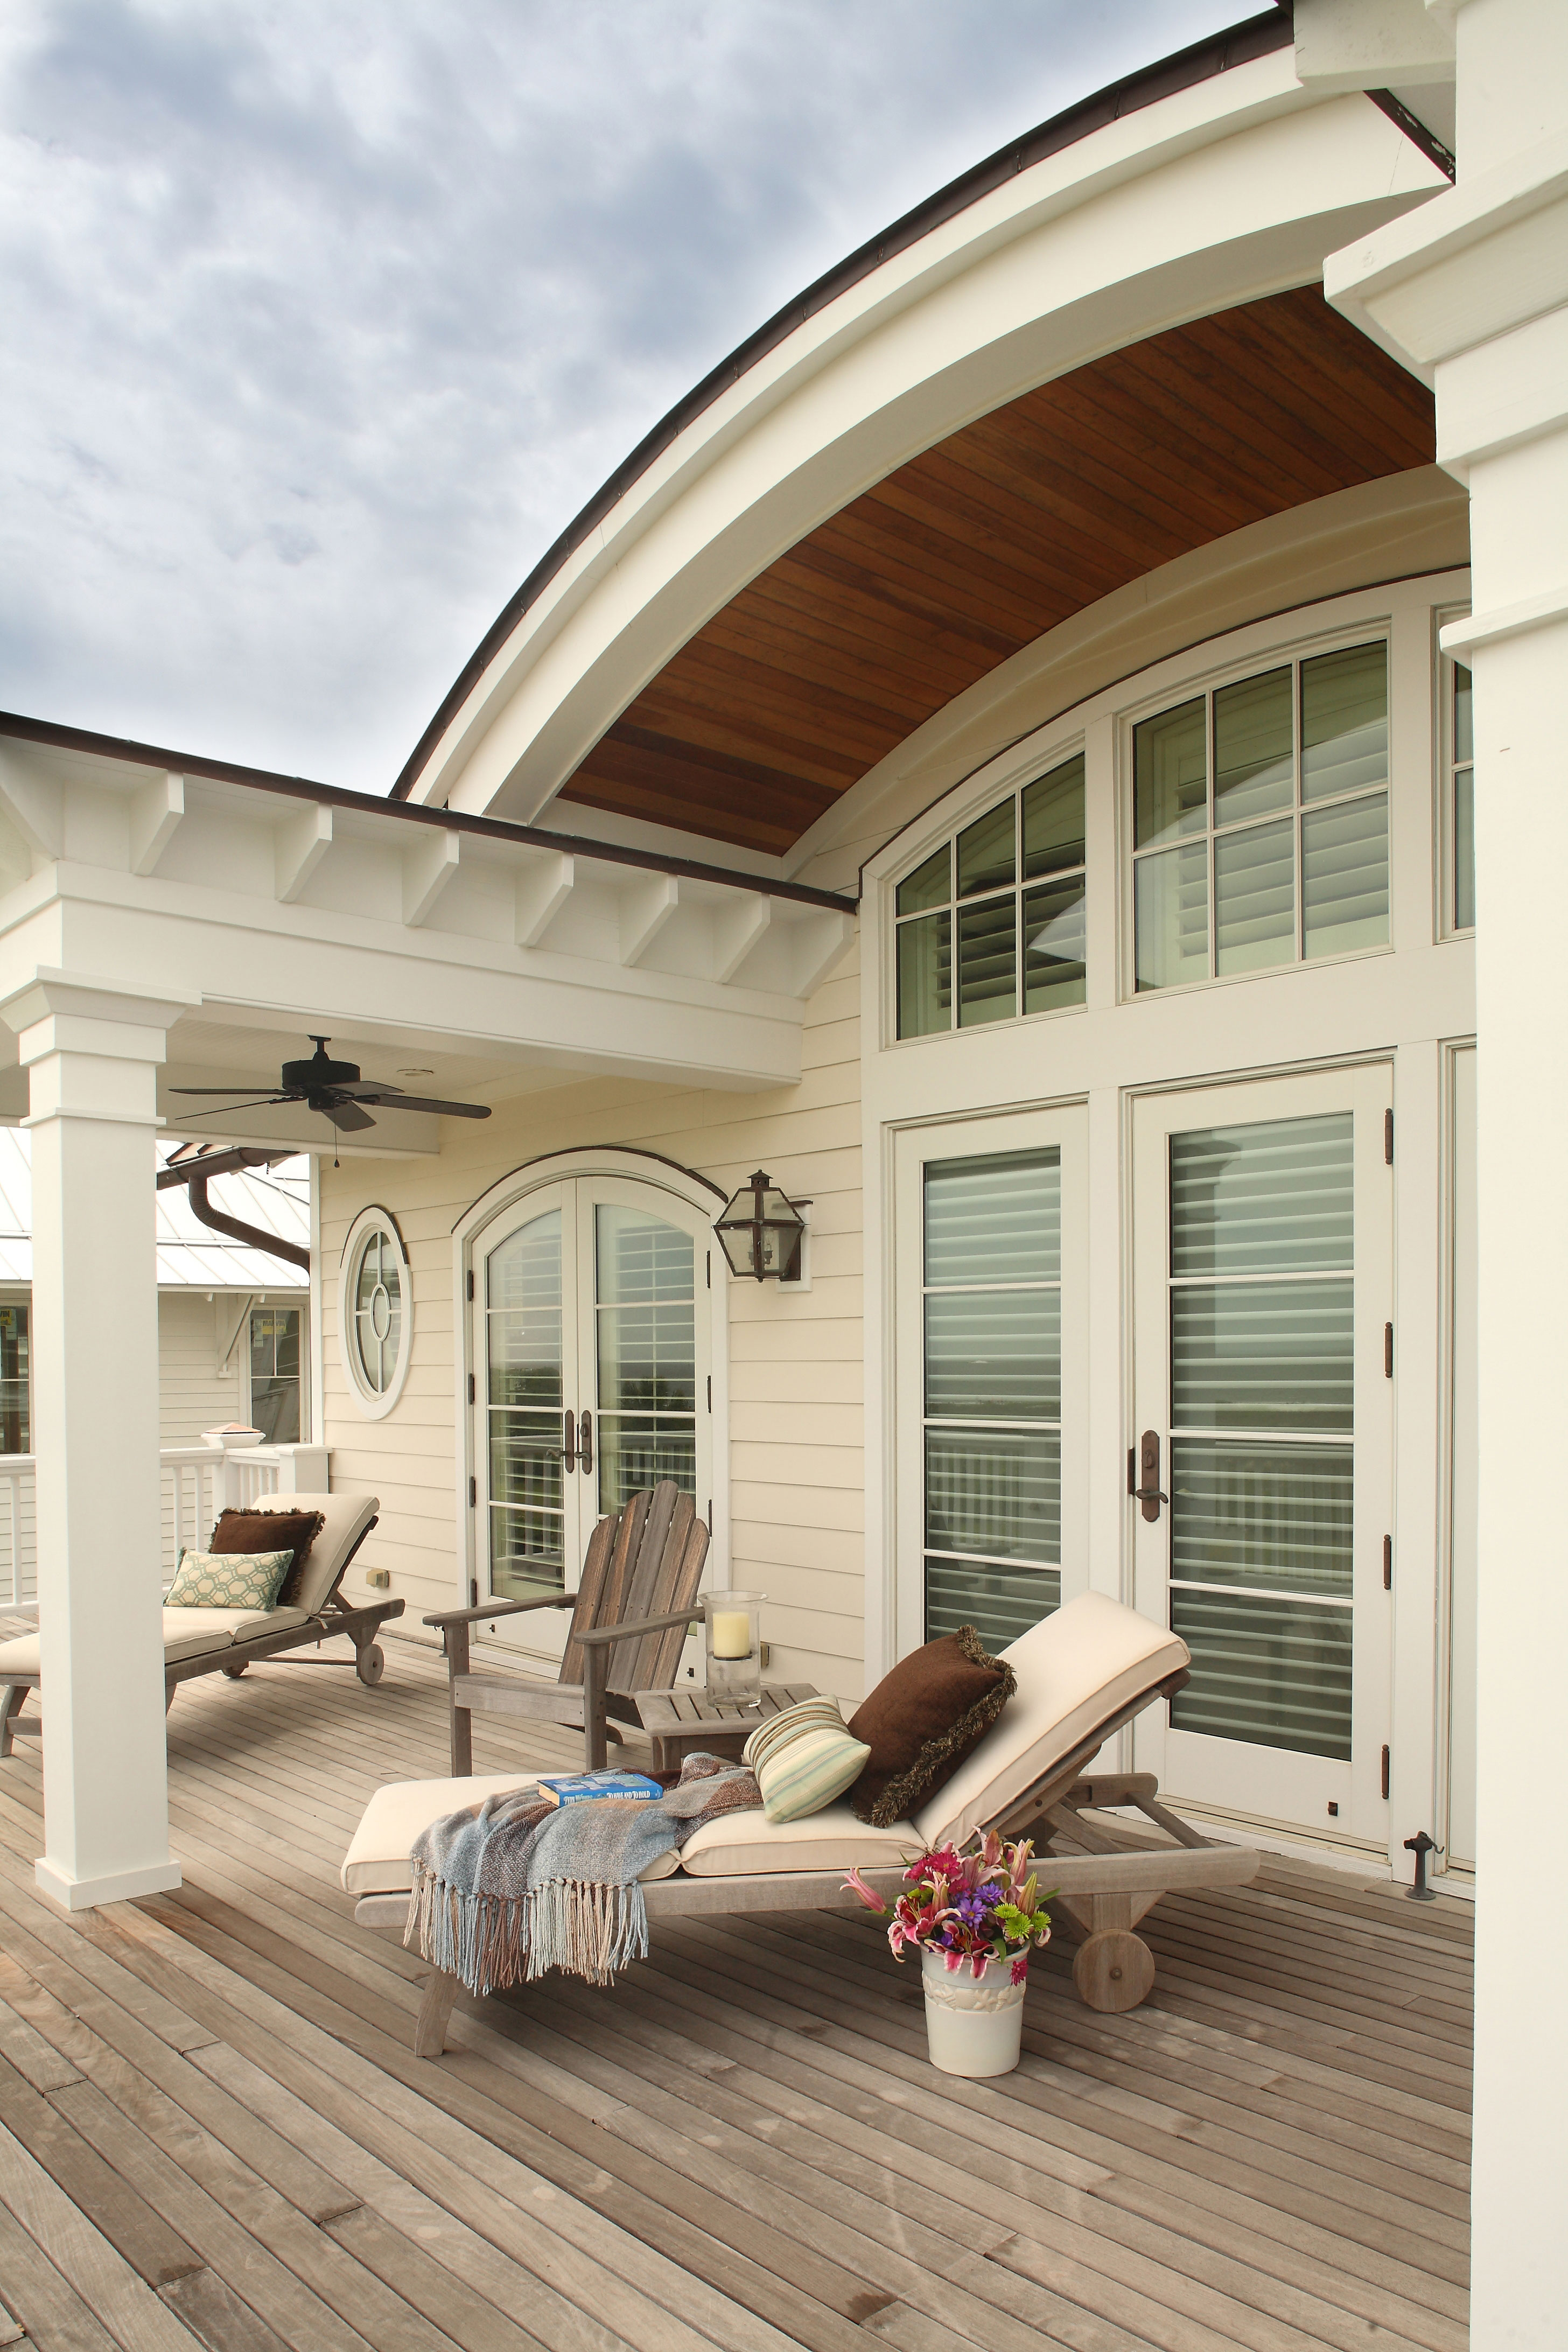 Deck alcove with barreled wood ceiling